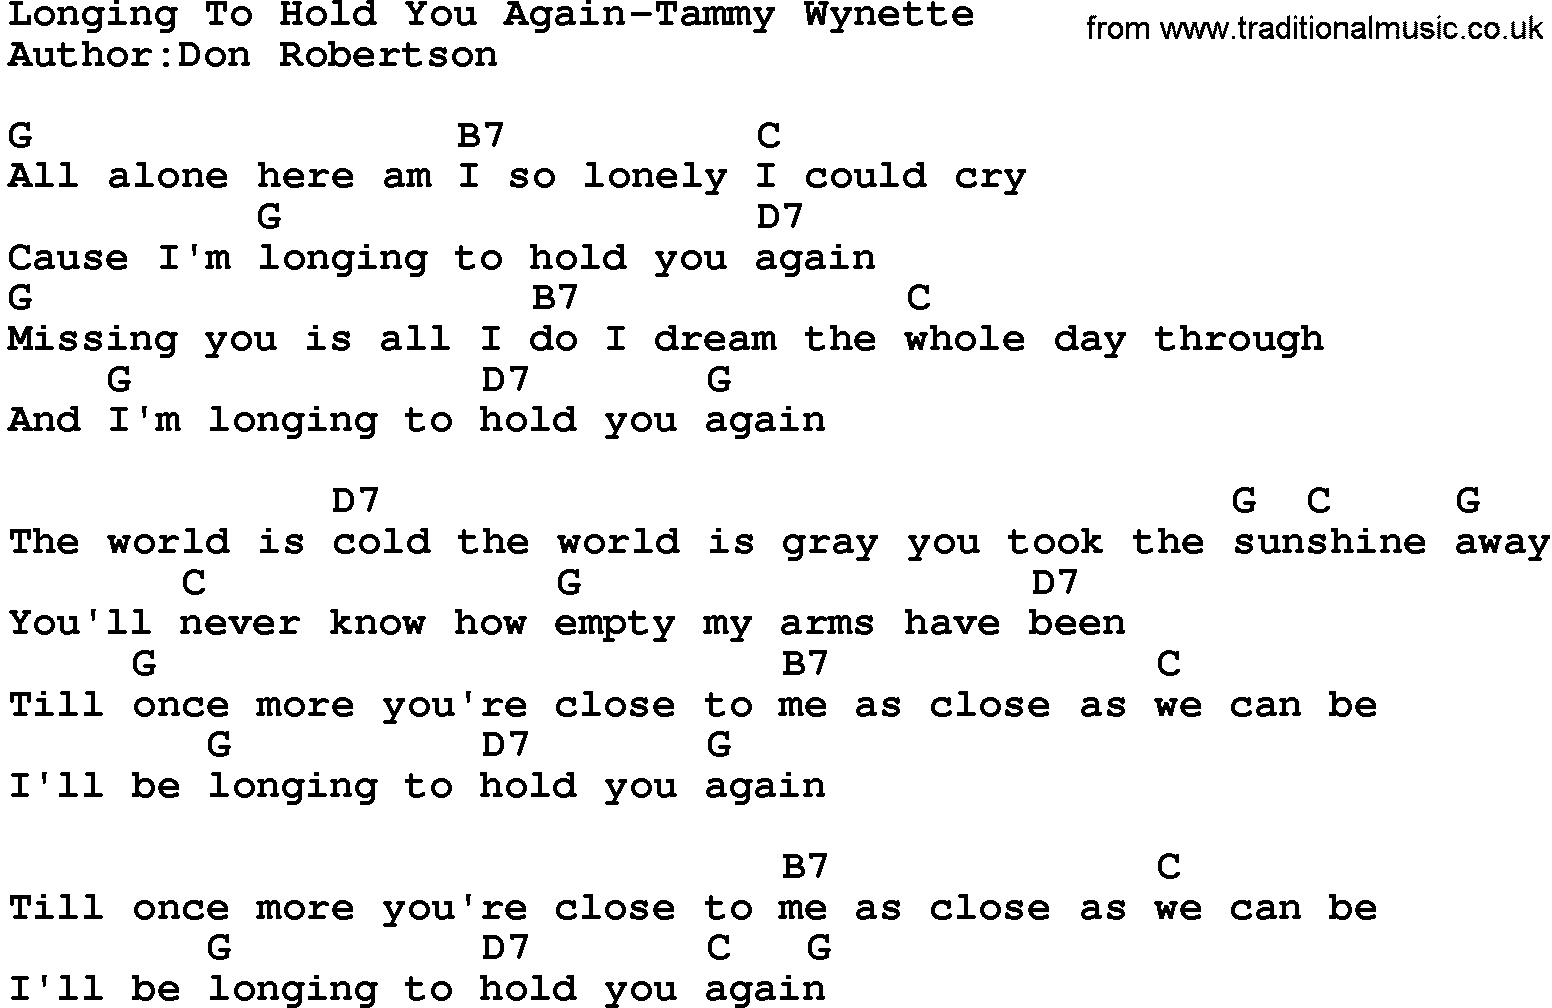 Country music song: Longing To Hold You Again-Tammy Wynette lyrics and chords